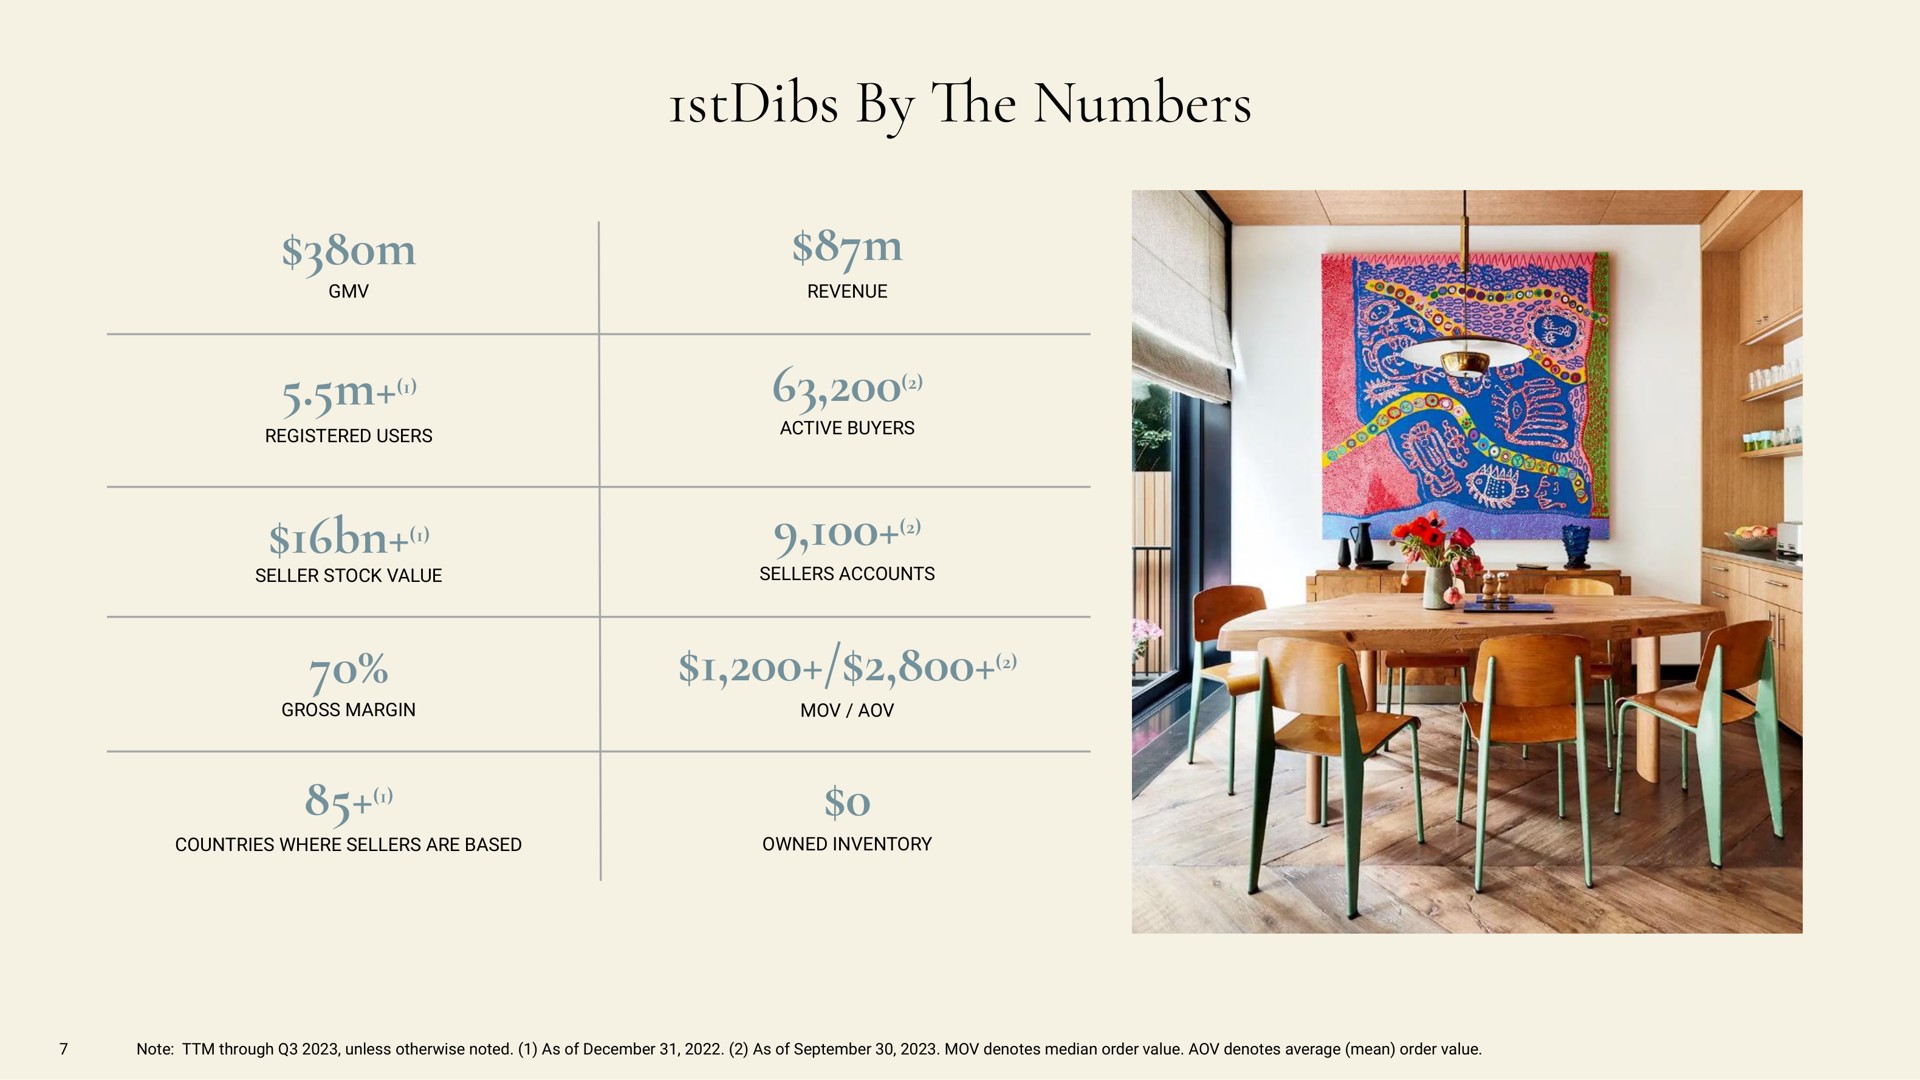 by the numbers | 1stDibs